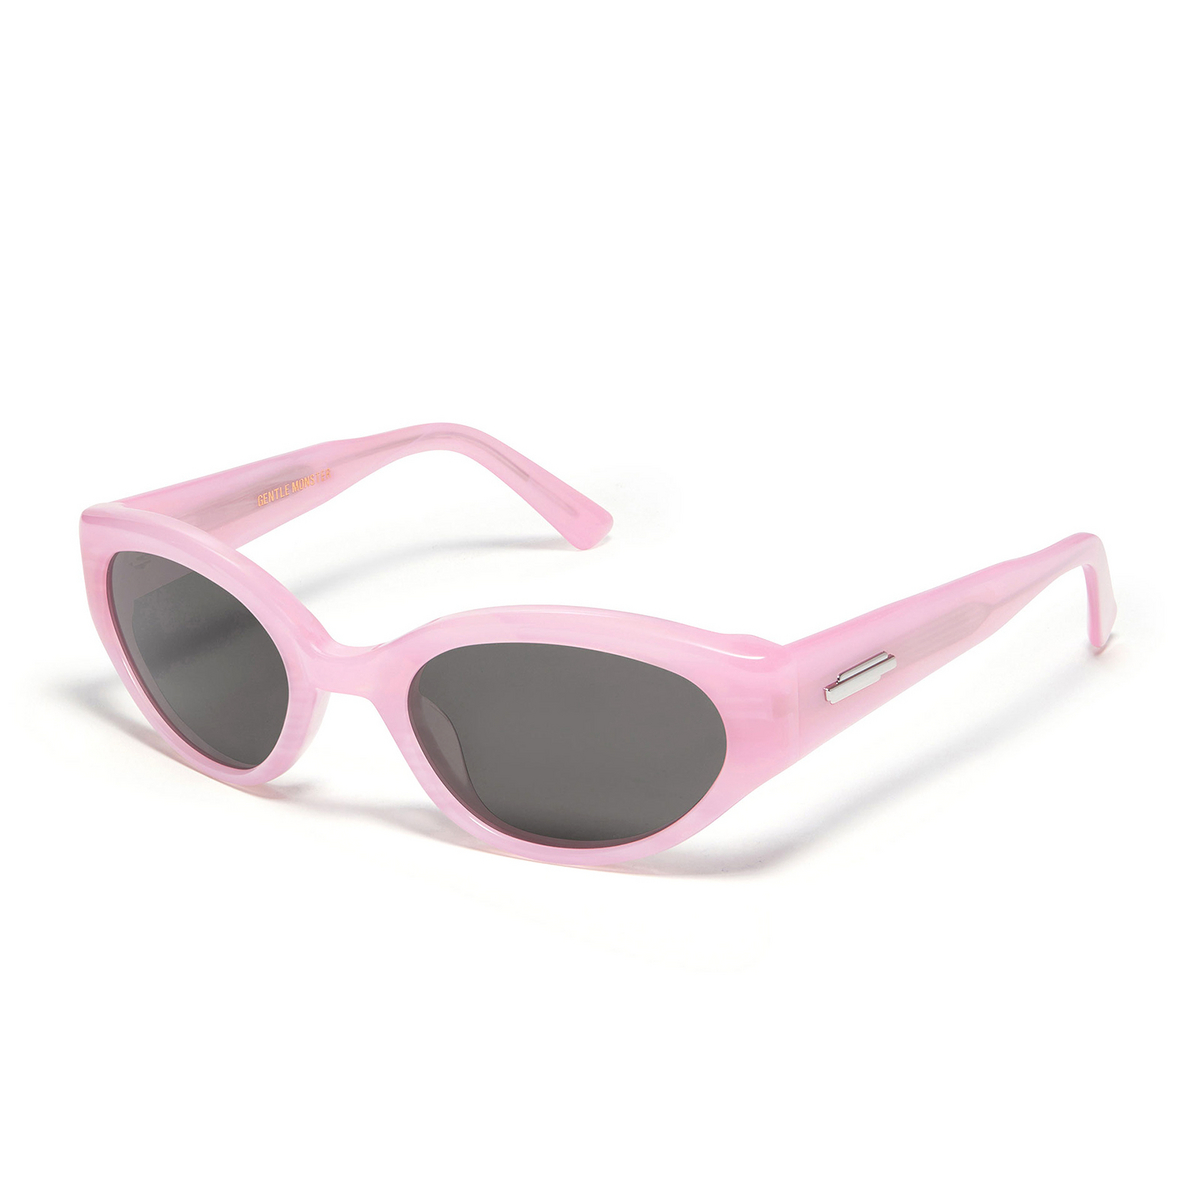 Gentle Monster® Cat-eye Sunglasses: Molto color P1 Pink - three-quarters view